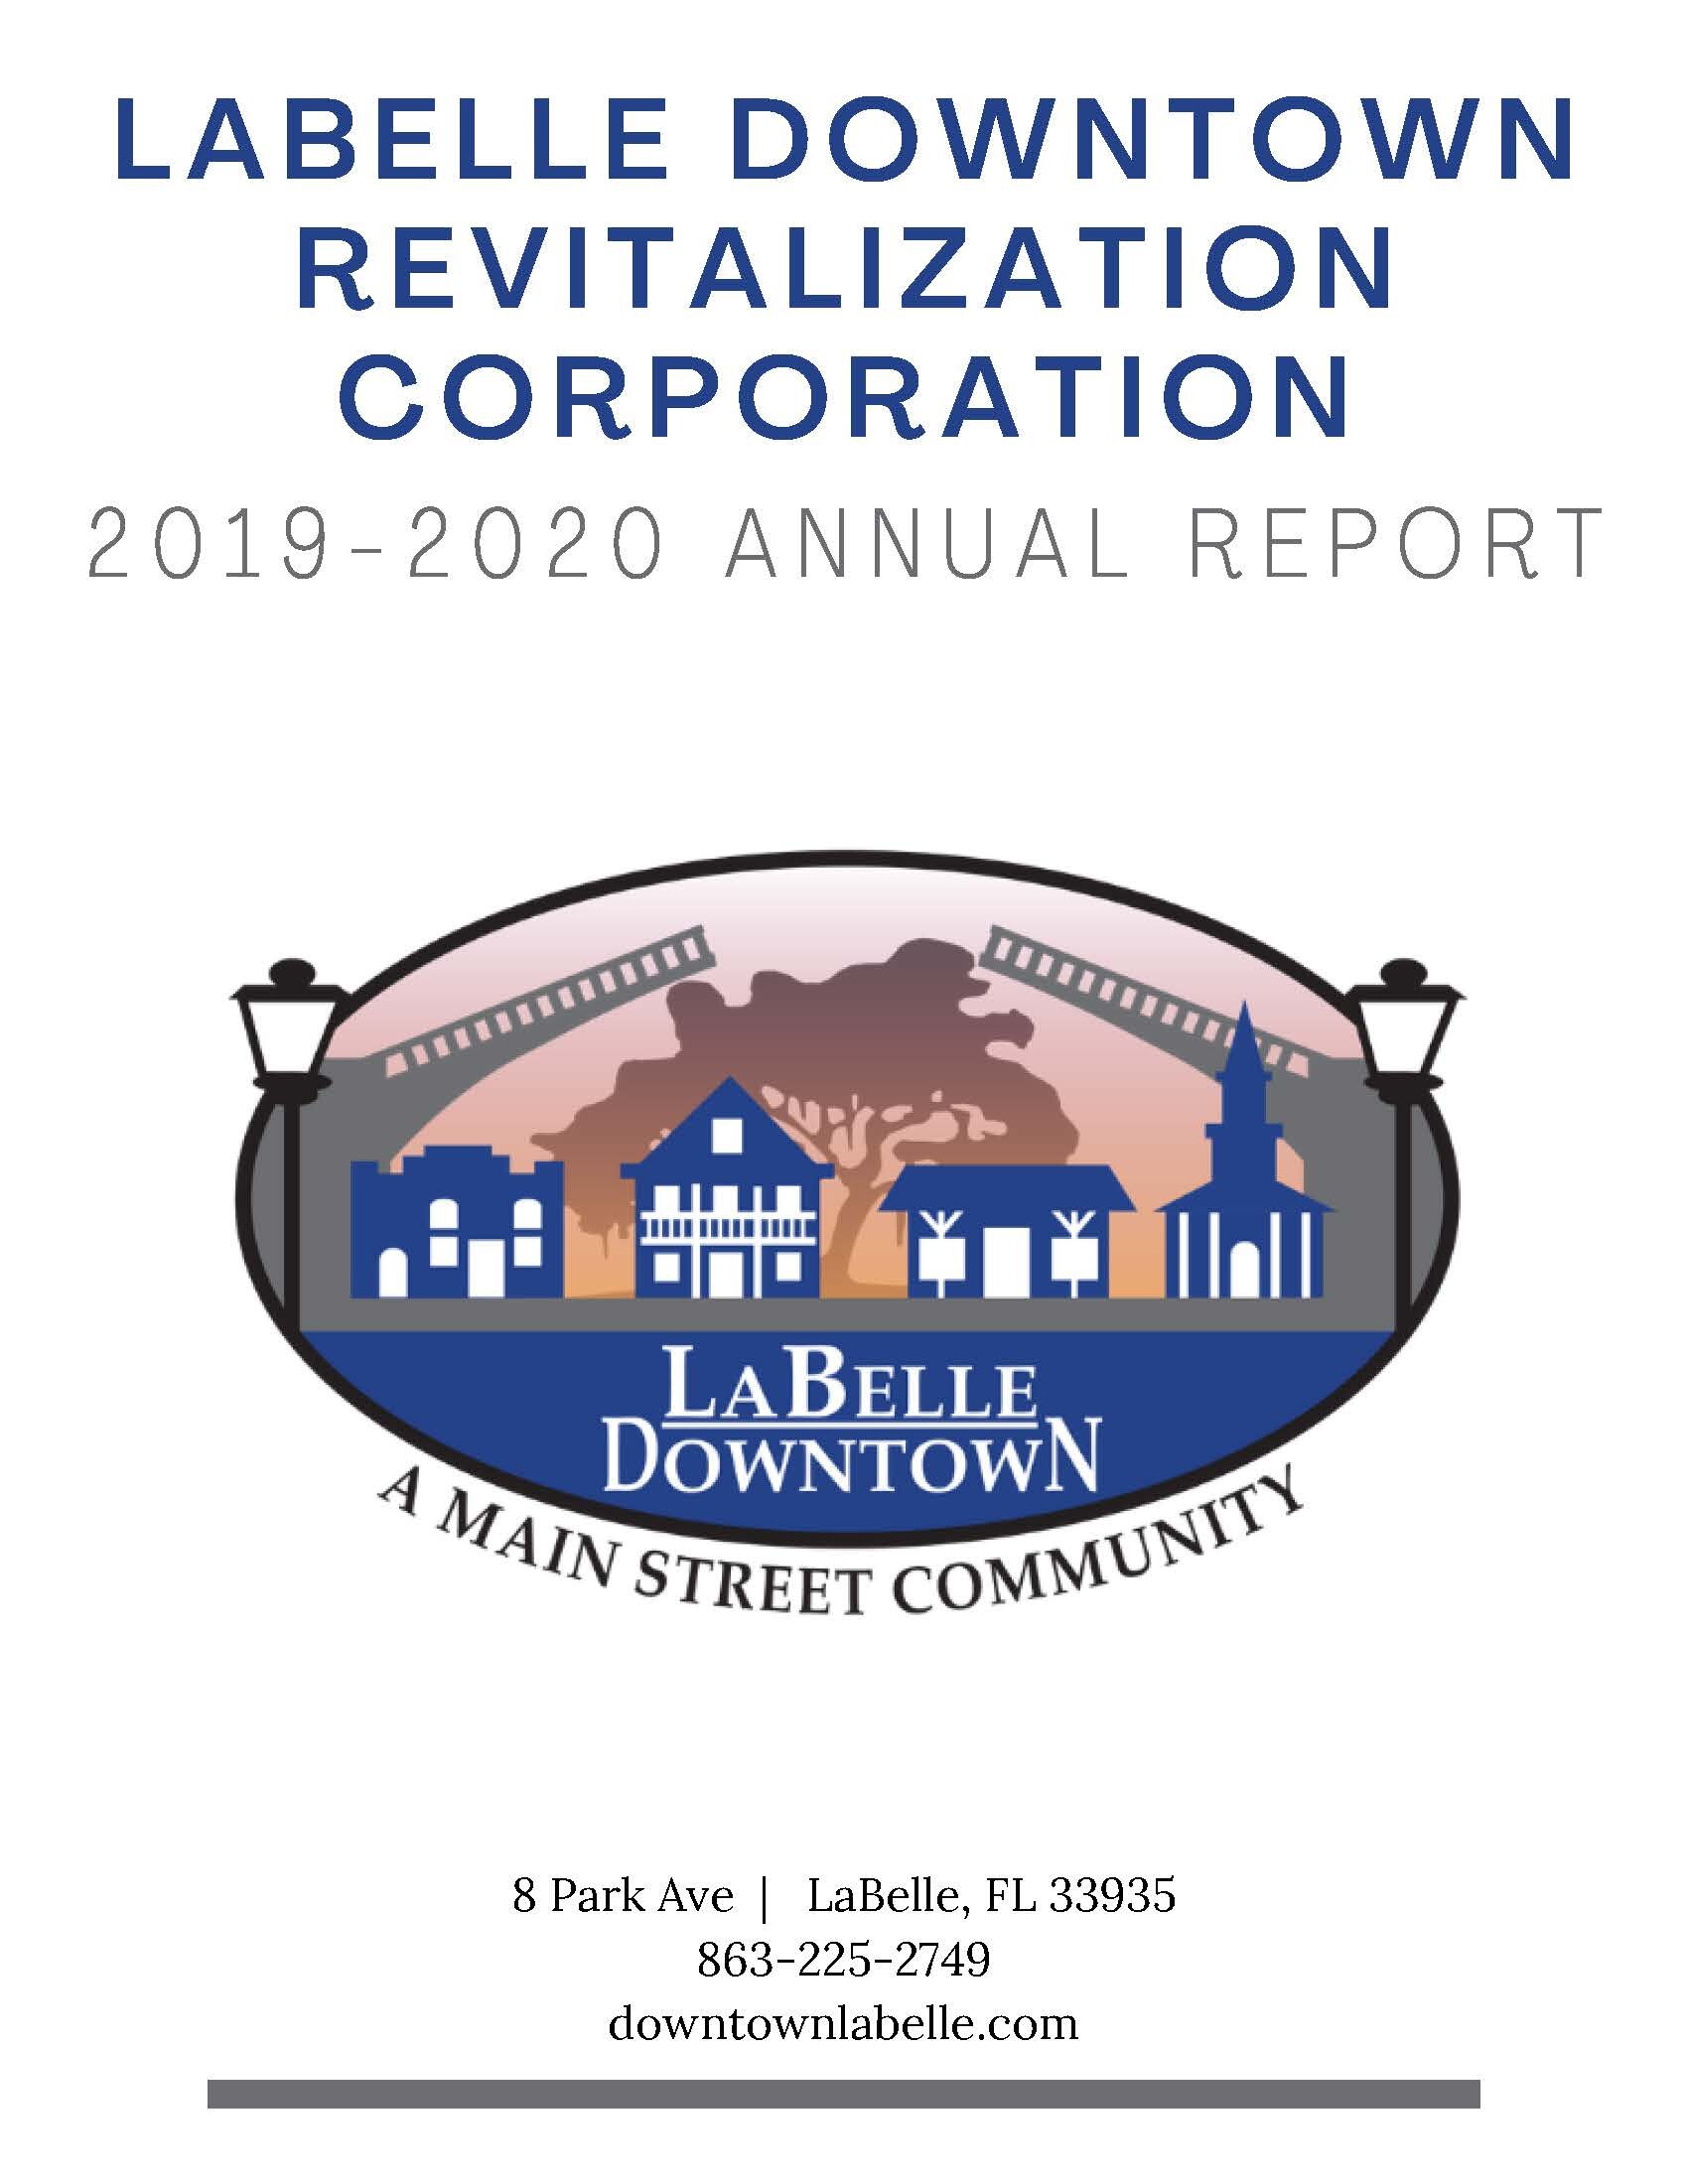 LDRC 201920 Annual Report (1)_Page_1.jpg